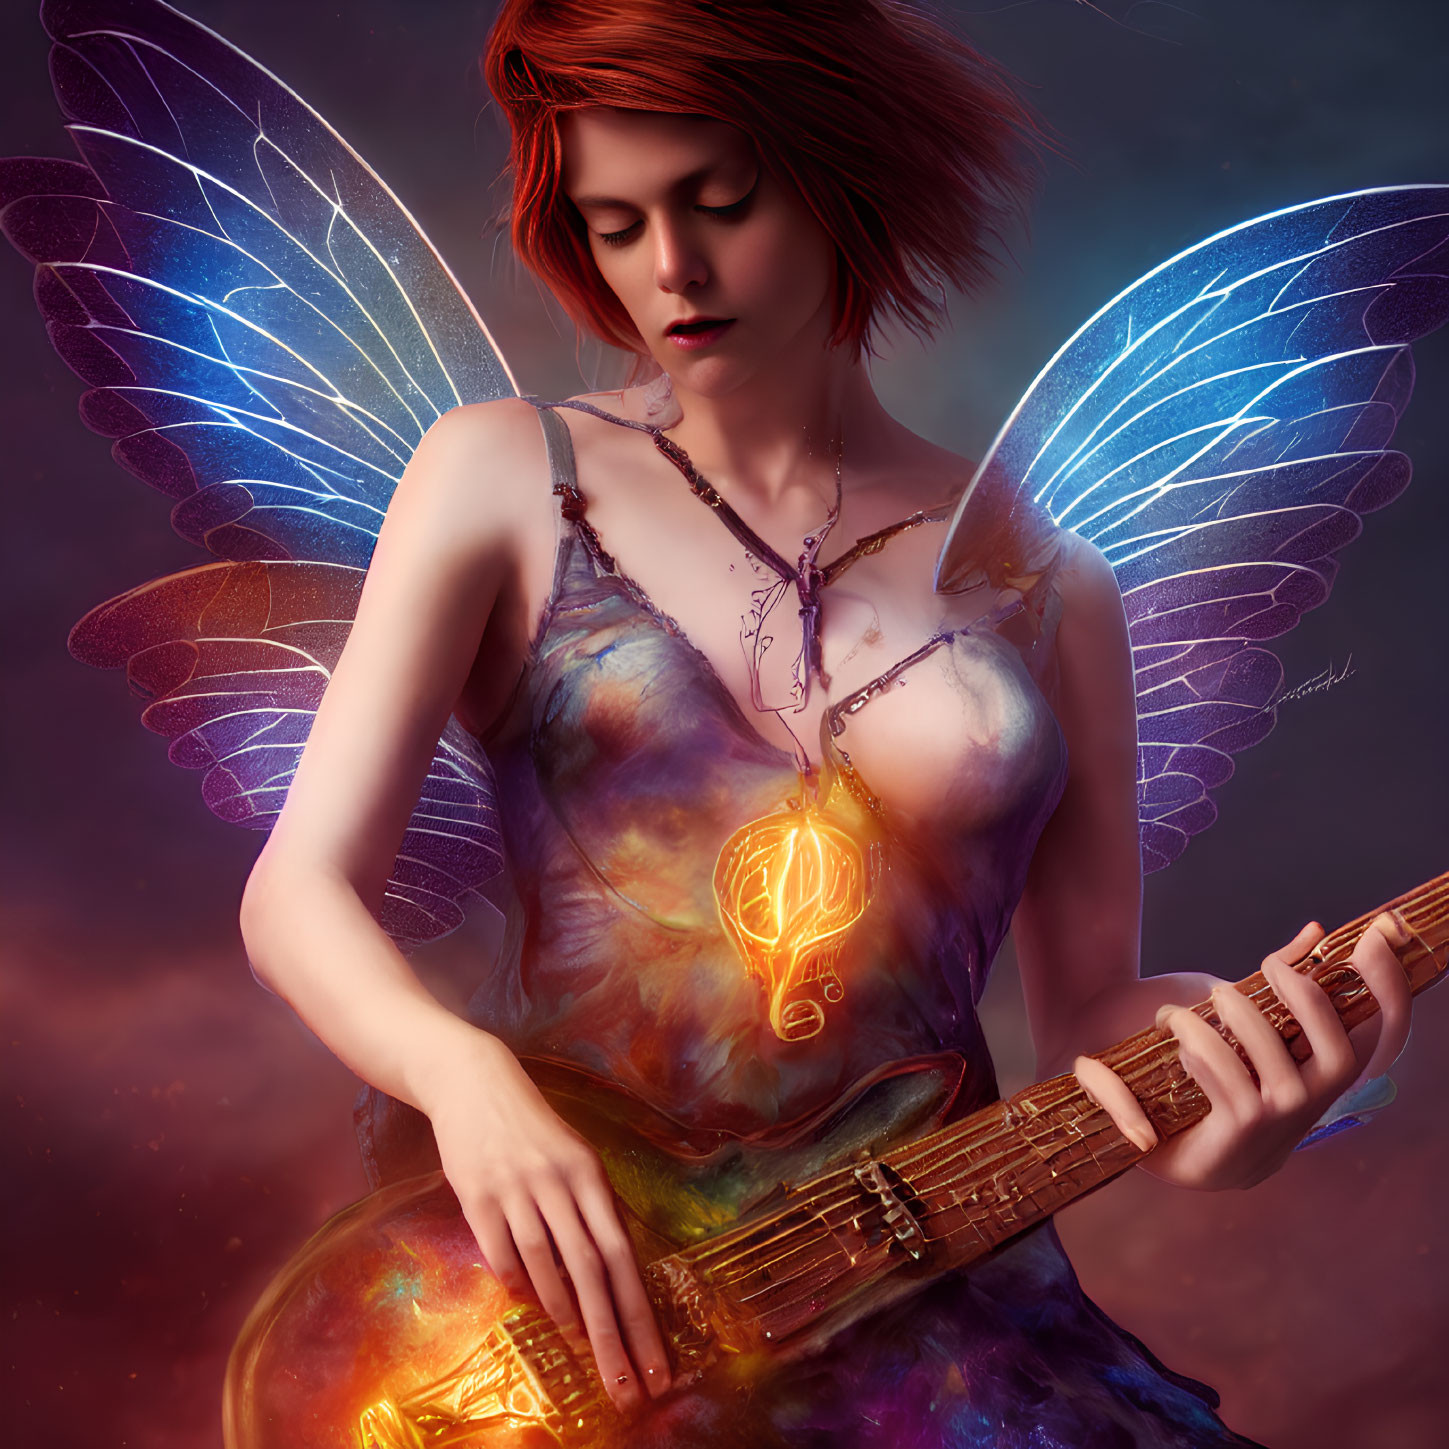 Fantasy digital art: Female figure with butterfly wings and cosmic background